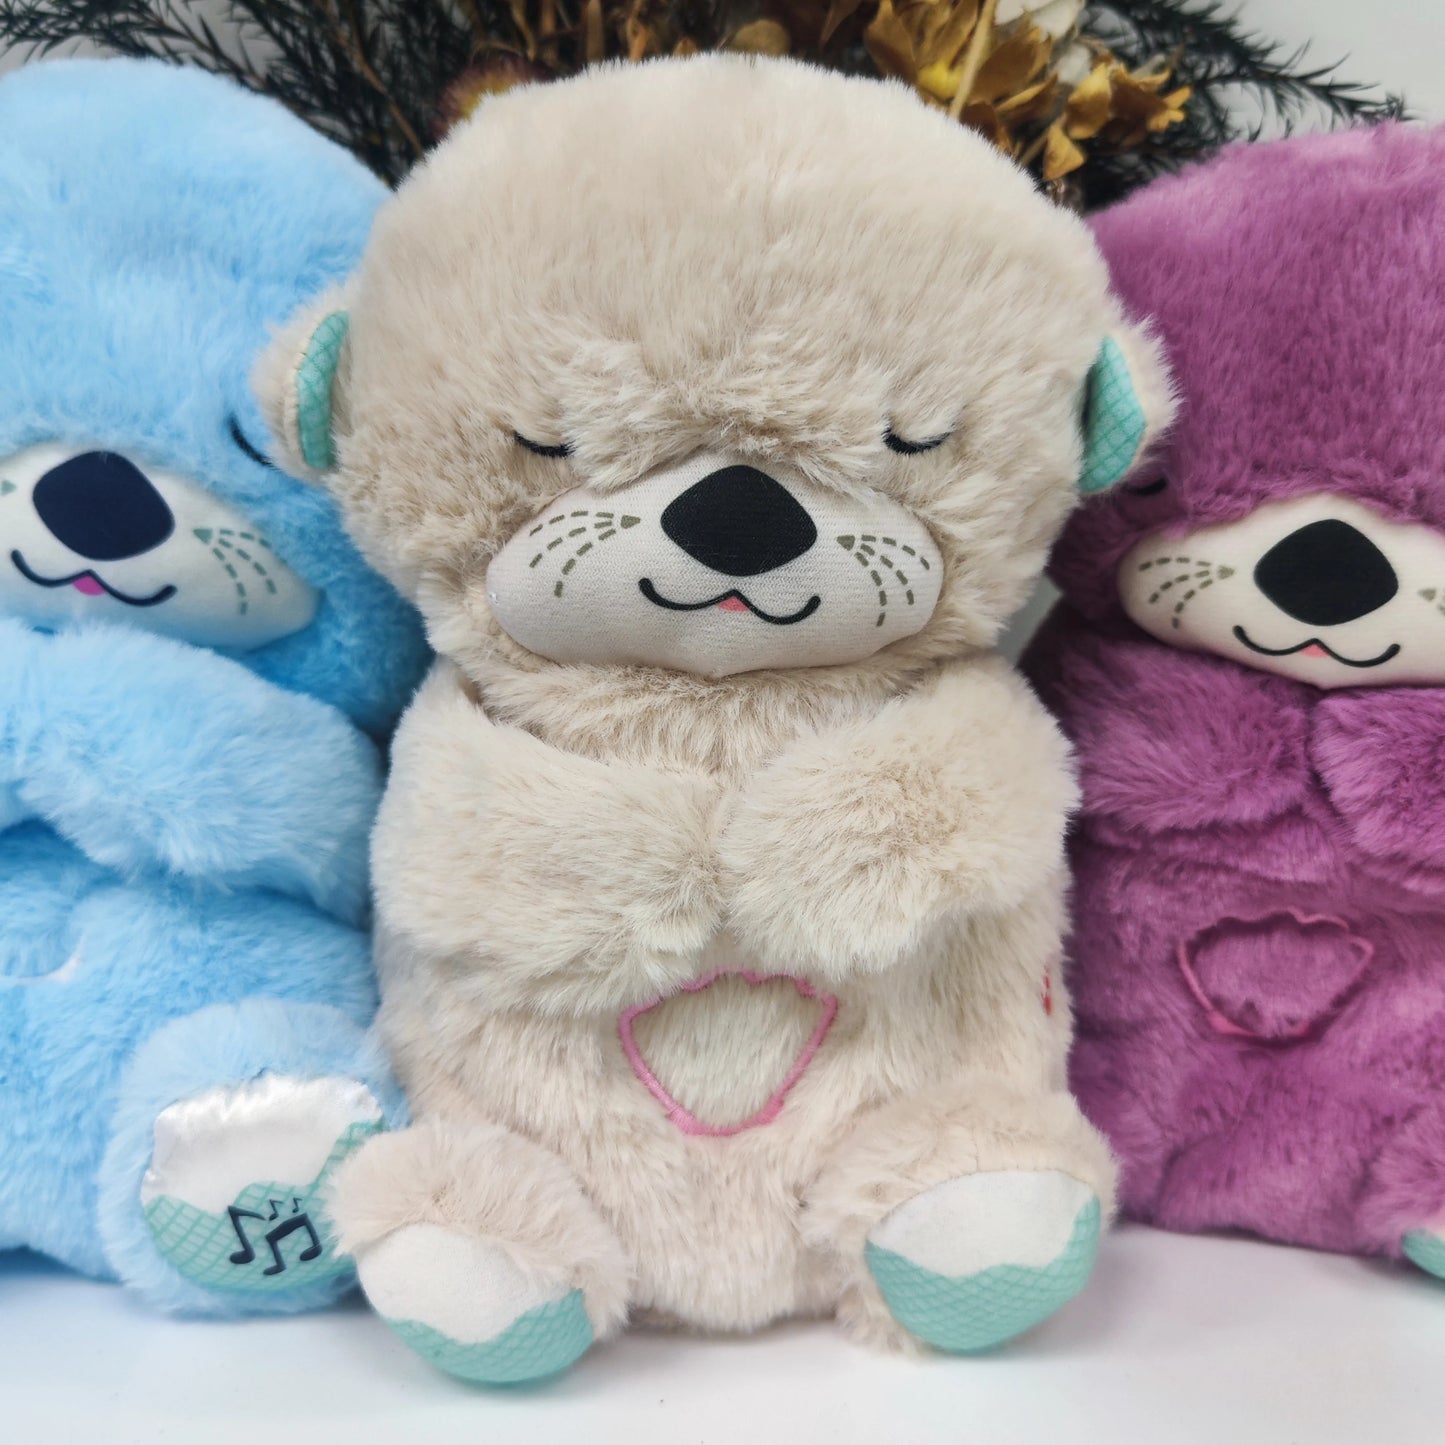 Baby Music Breathing Bear Baby Soothing Otter Plush Doll Toy Baby Kids Soothing  Sleeping Companion Sound and Light Doll Toy Gif